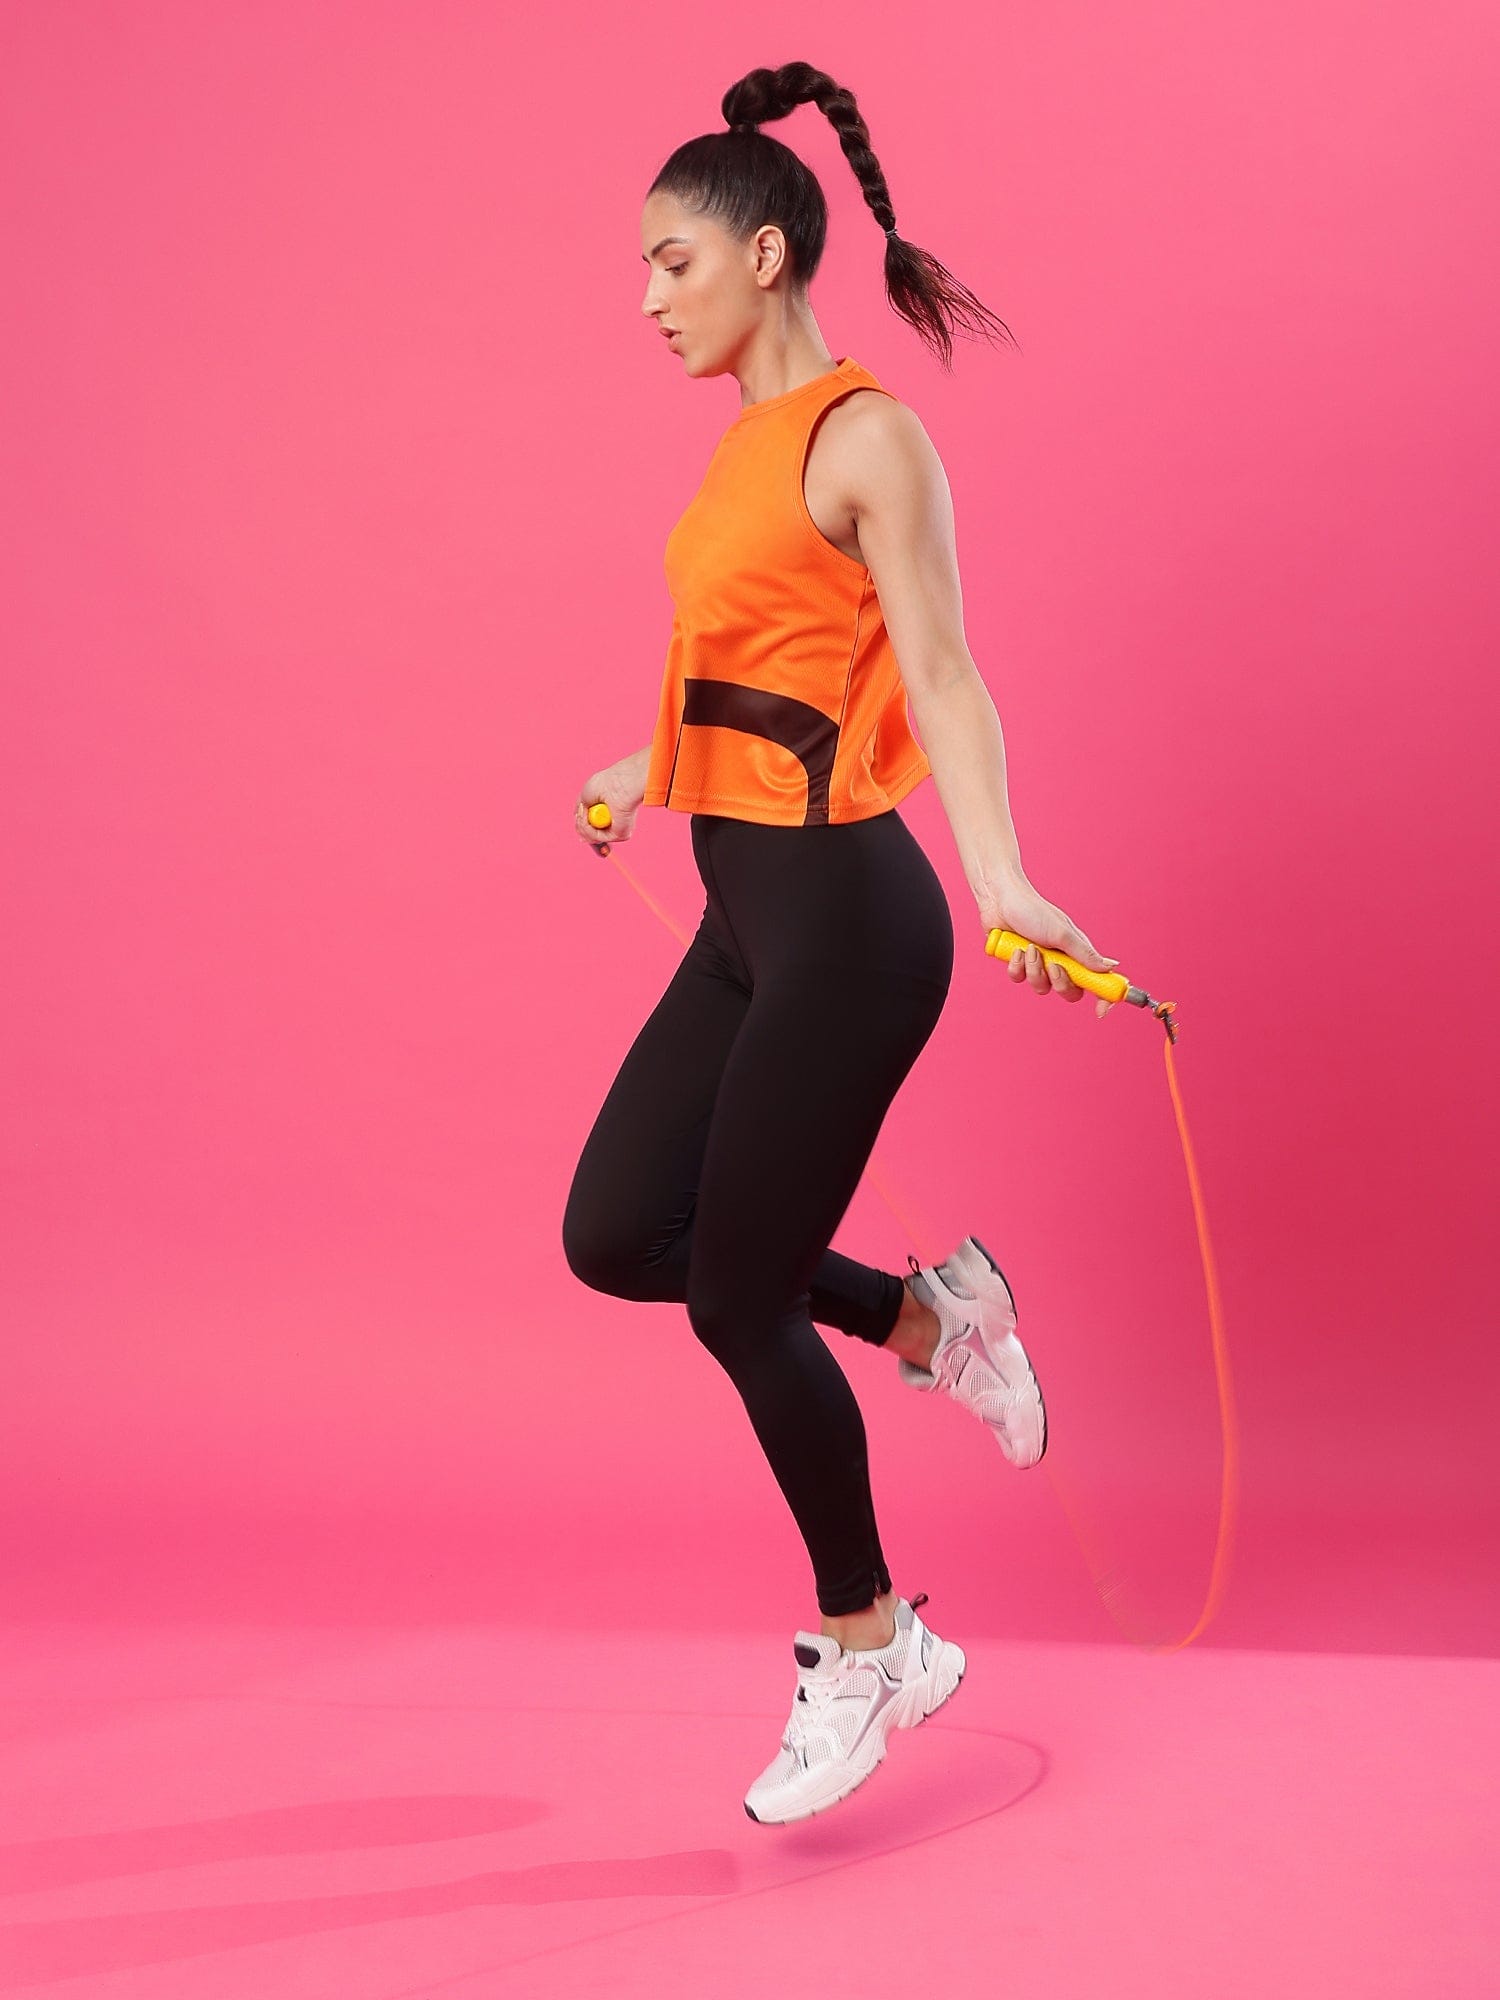 woman doing skipping exercise